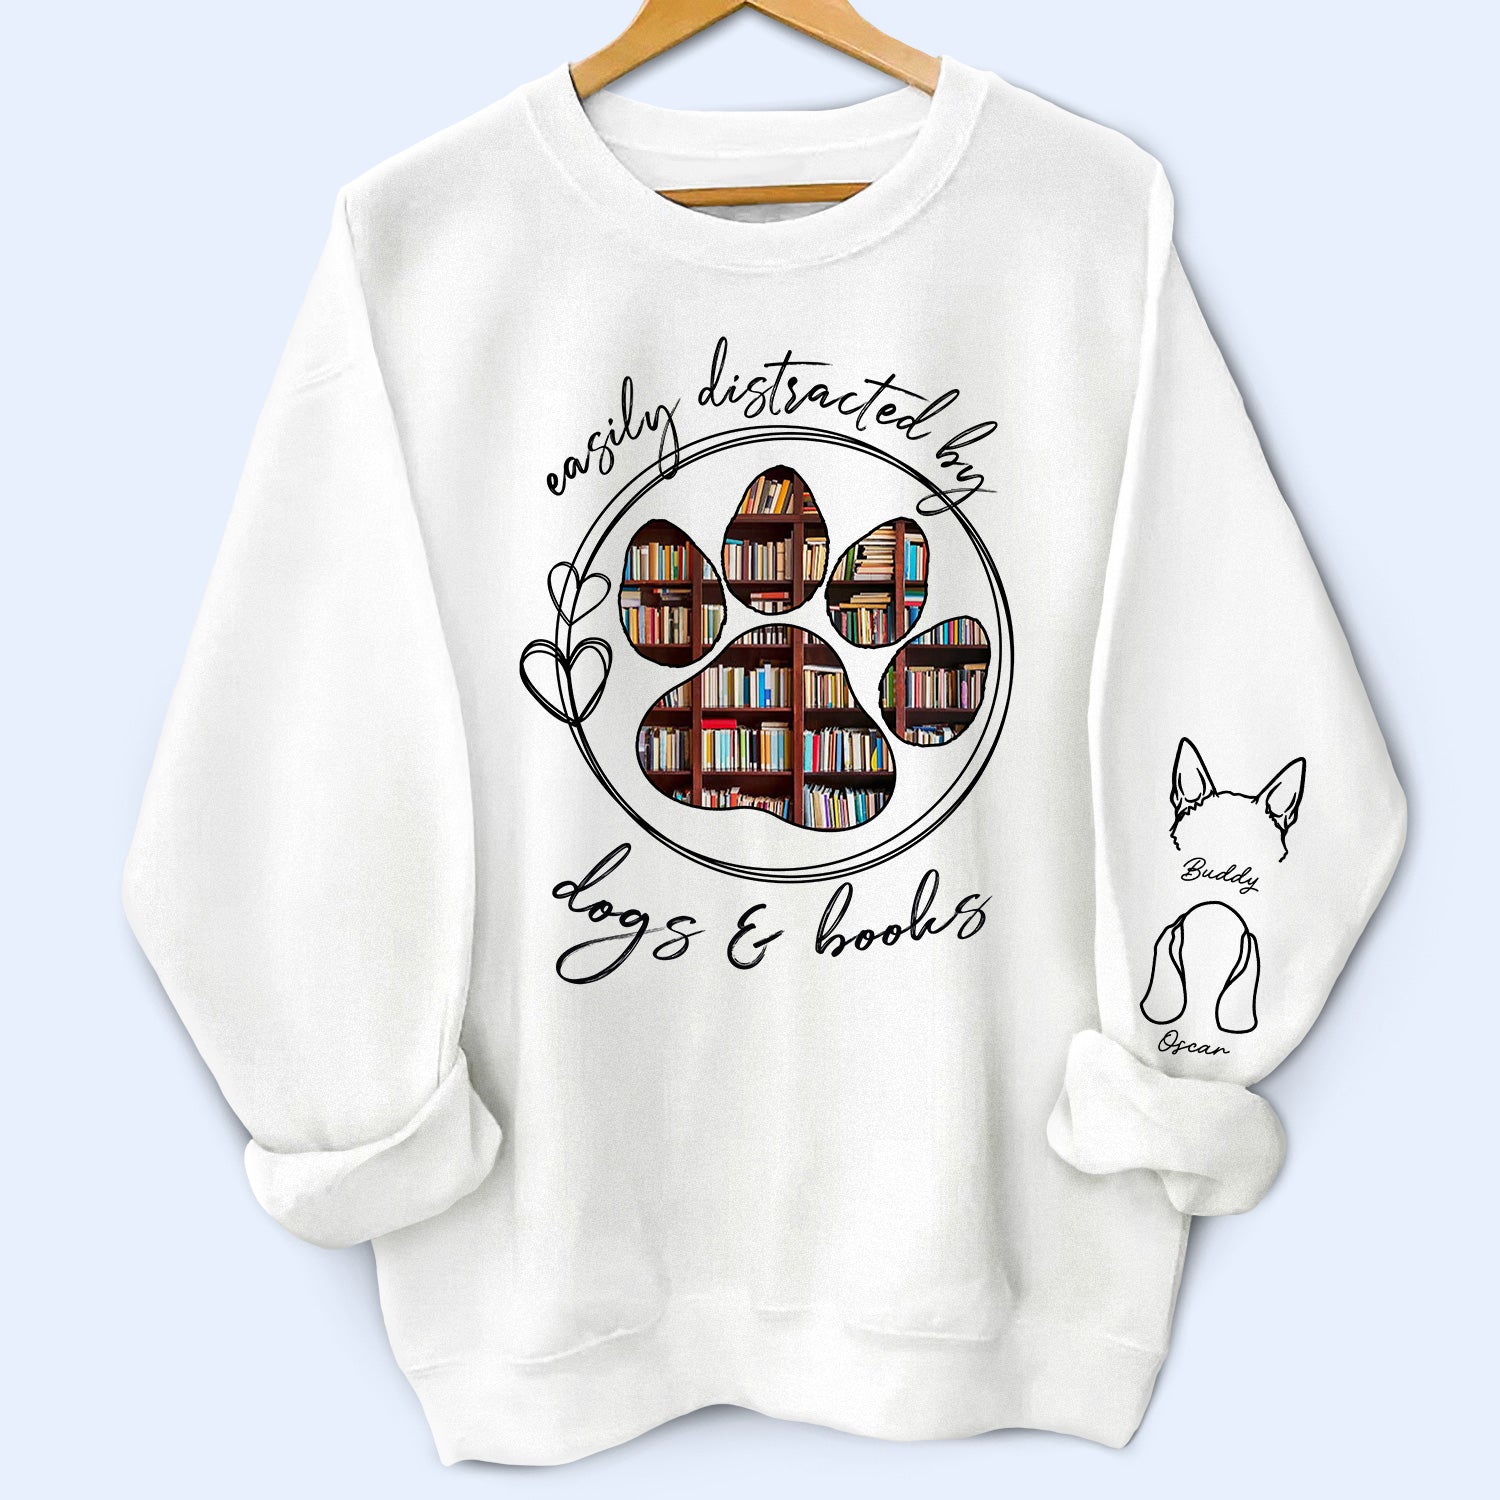 Easily Distracted By Dogs Cats And Books - Birthday, Loving Gift For Dog Lover, Cat Mom, Pet Mum - Personalized Unisex Sweatshirt With Design On Sleeve